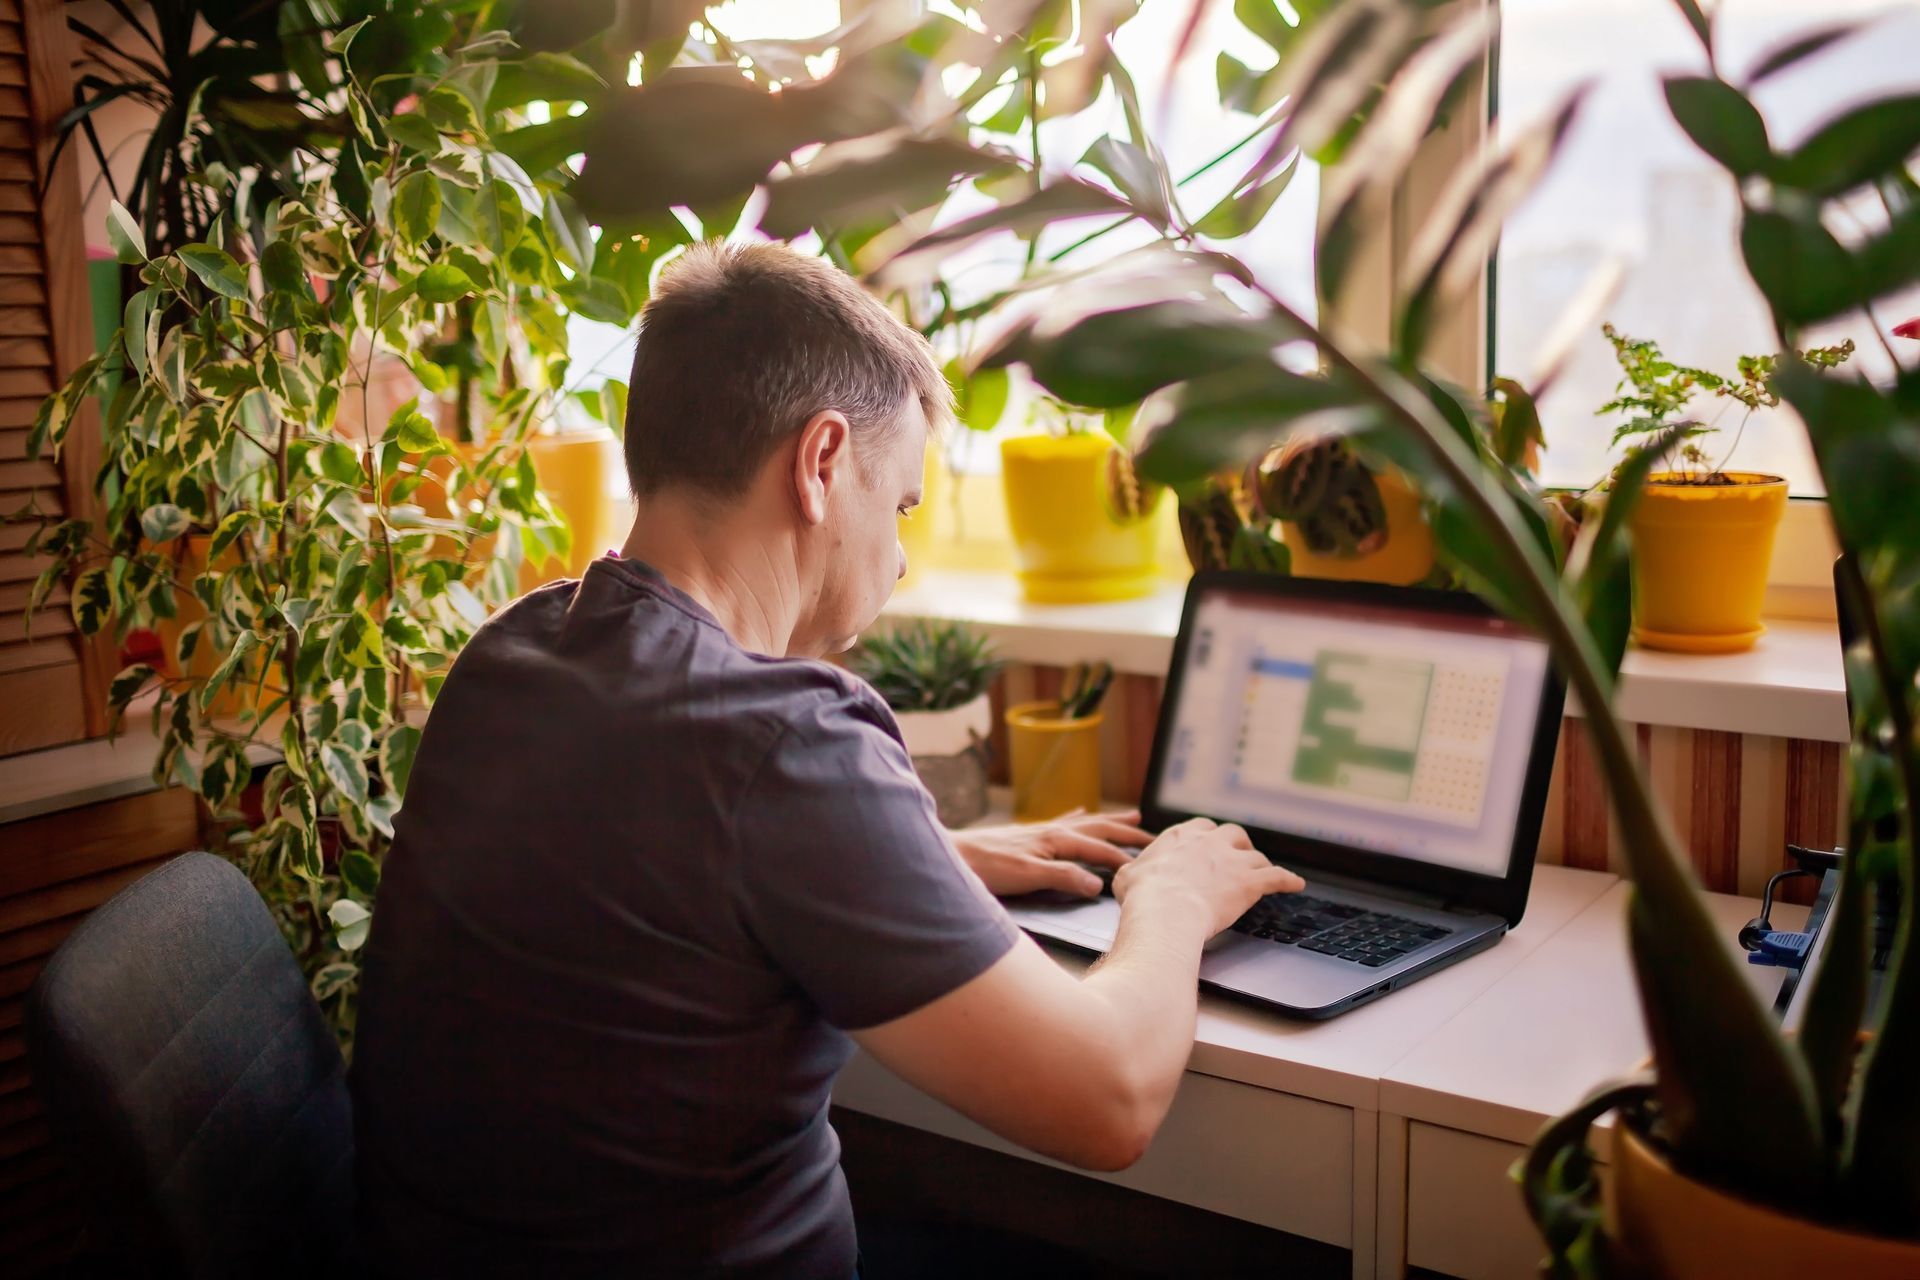 A man working with laptop remotely from home garden pod. A distant work place with many home plants. Green nature inspired home office pod. Indoor outdoor lifestyle